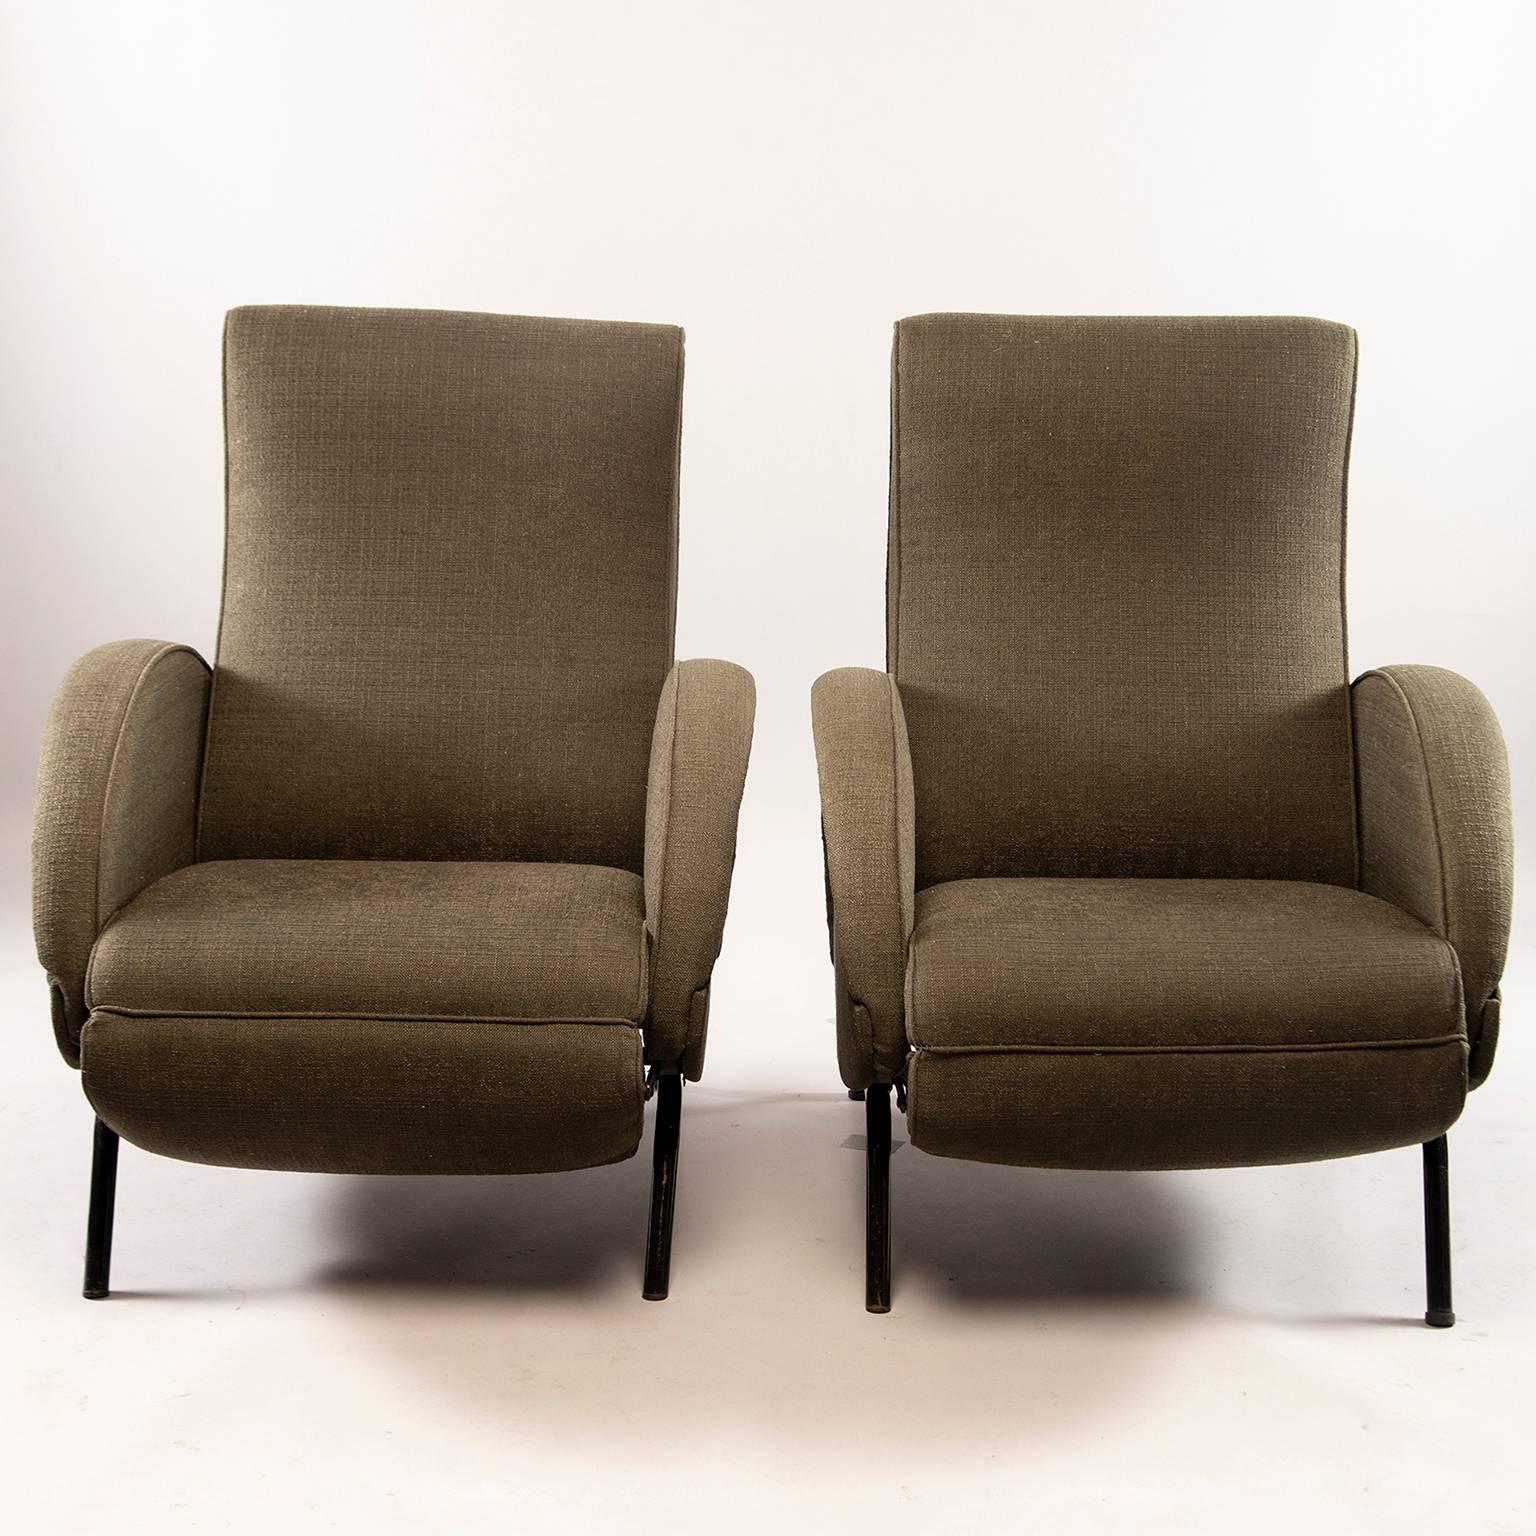 Pair of circa 1960s reclining armchairs in style of Marco Zanuso by Italian maker Dormiveglia Brevettatata. Chairs have black metal tubular frames and legs with high backs, curvy rounded arms and reclining seats. Recliner mechanism is